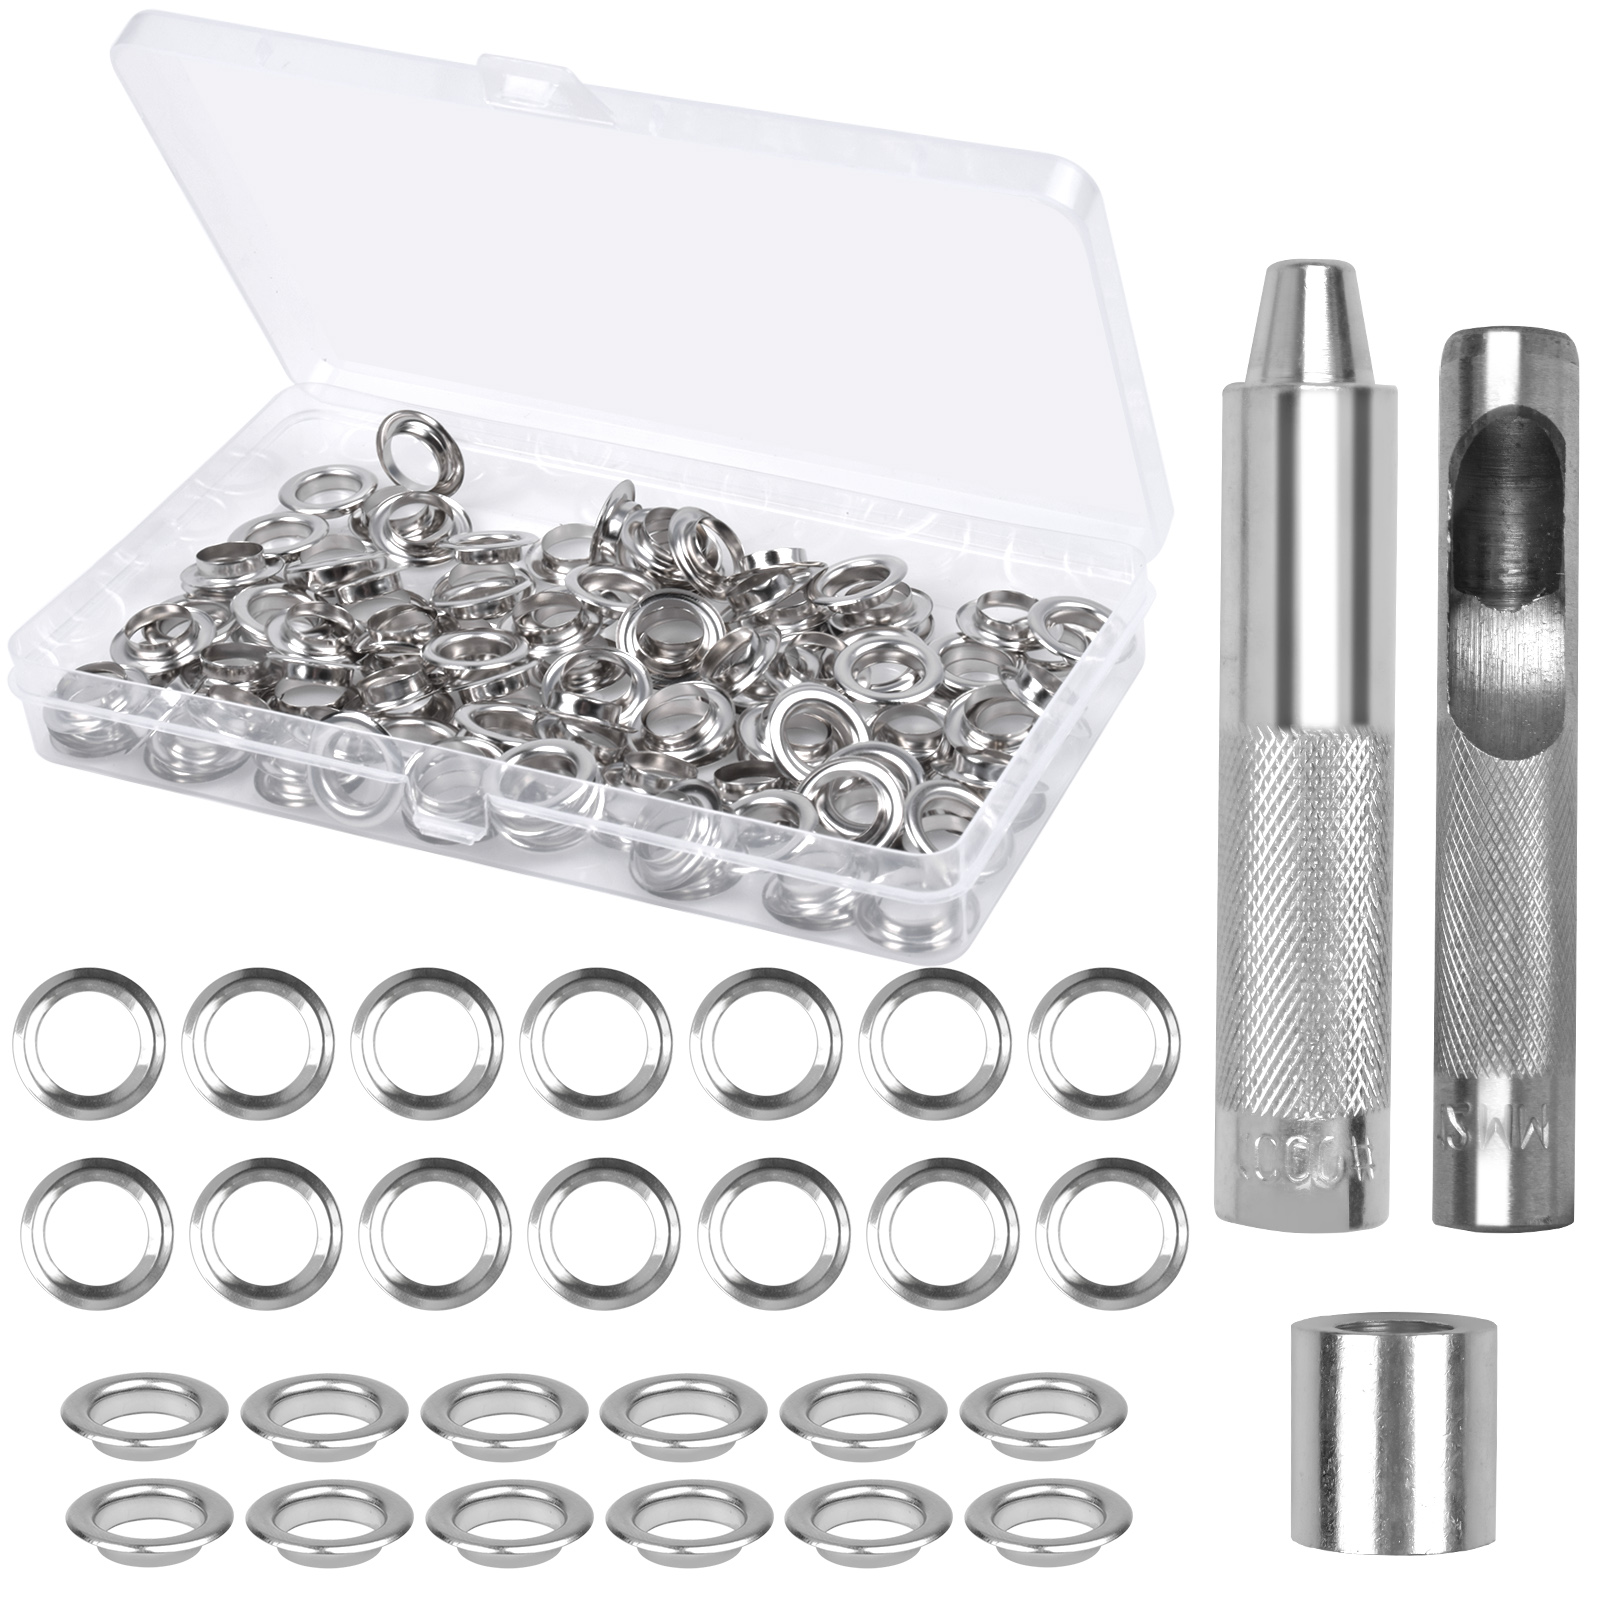 Outbound Metal Grommet Repair & Replacement Kit w/ Tools For Fabric & Tarps